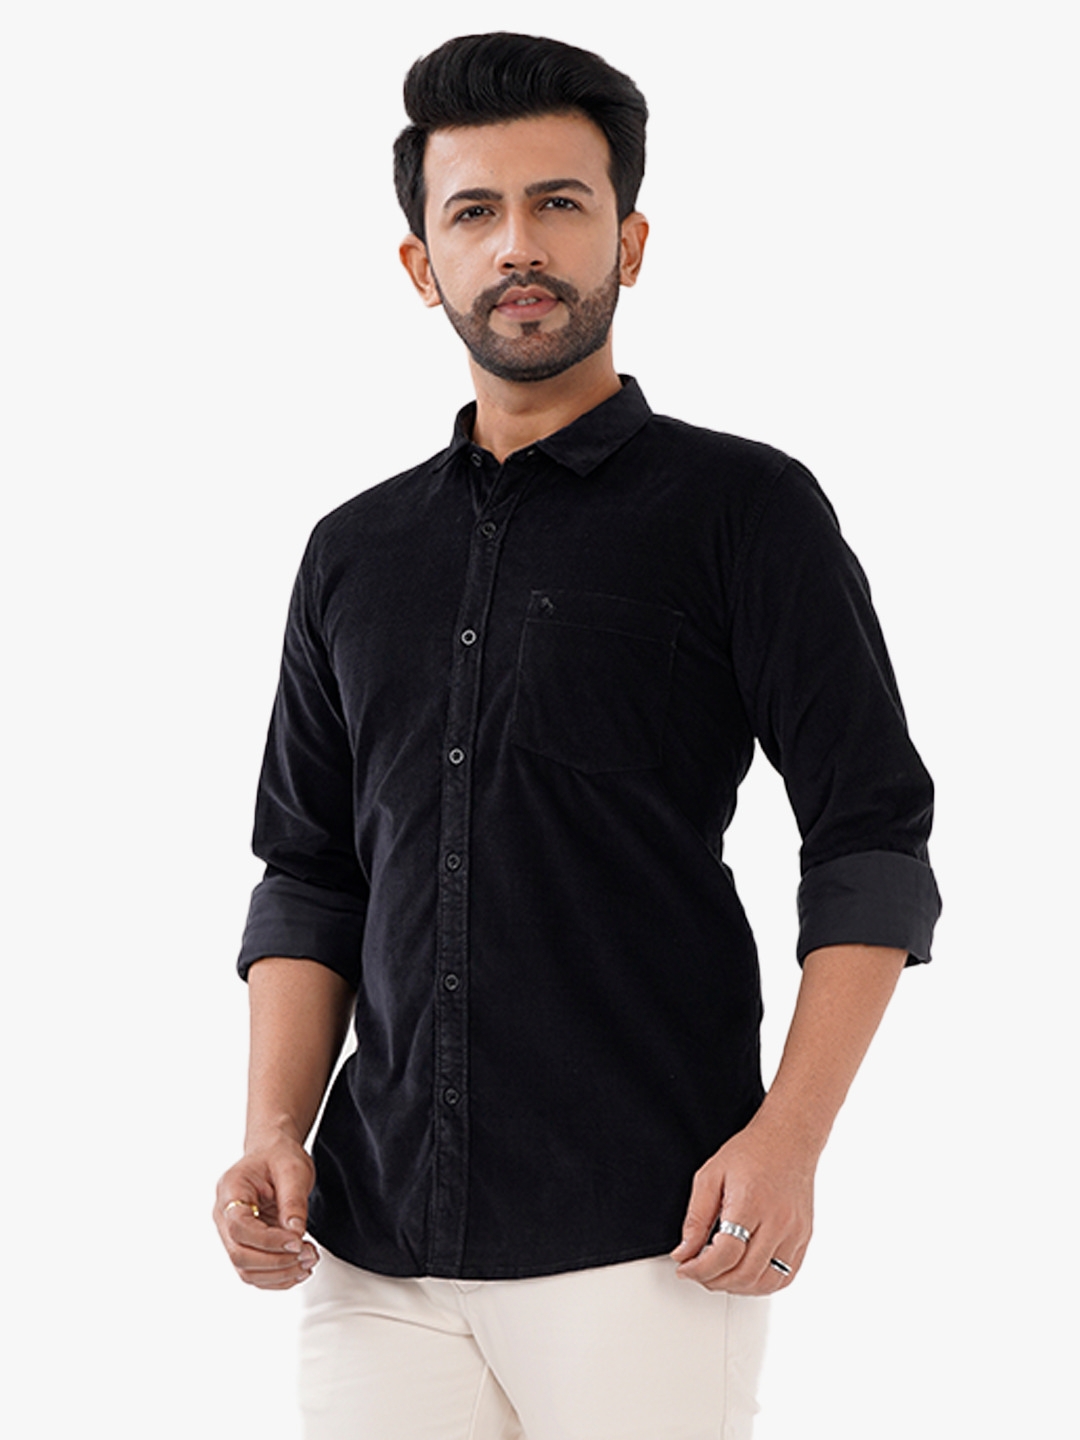 D'cot by Donear Men's Black Cotton Casual Shirts